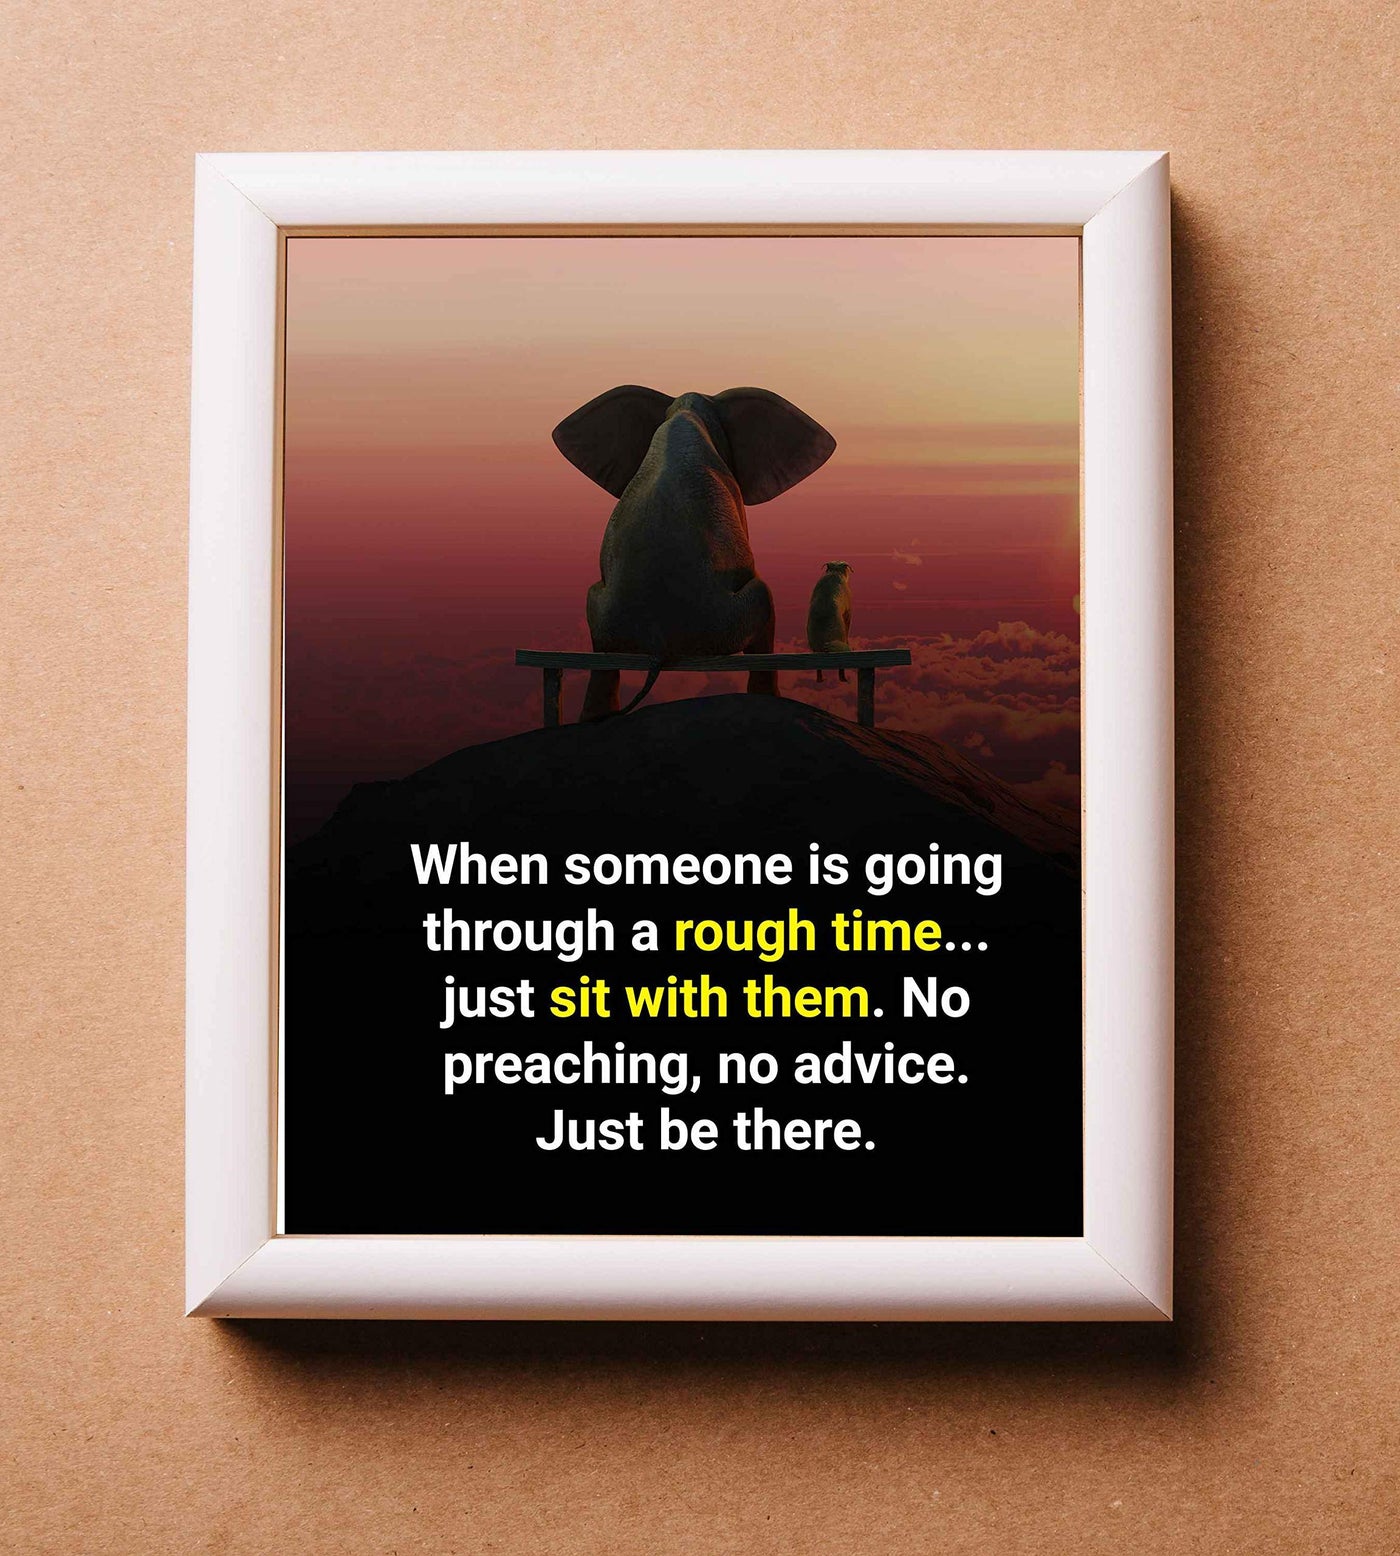 When Someone Is Going Through a Rough Time-Just Be There-Inspirational Wall Art -8 x 10" Sunset Print w/Elephant & Dog Image-Ready to Frame. Home-Office-School-Dorm-Decor. Reminder to Be Present!